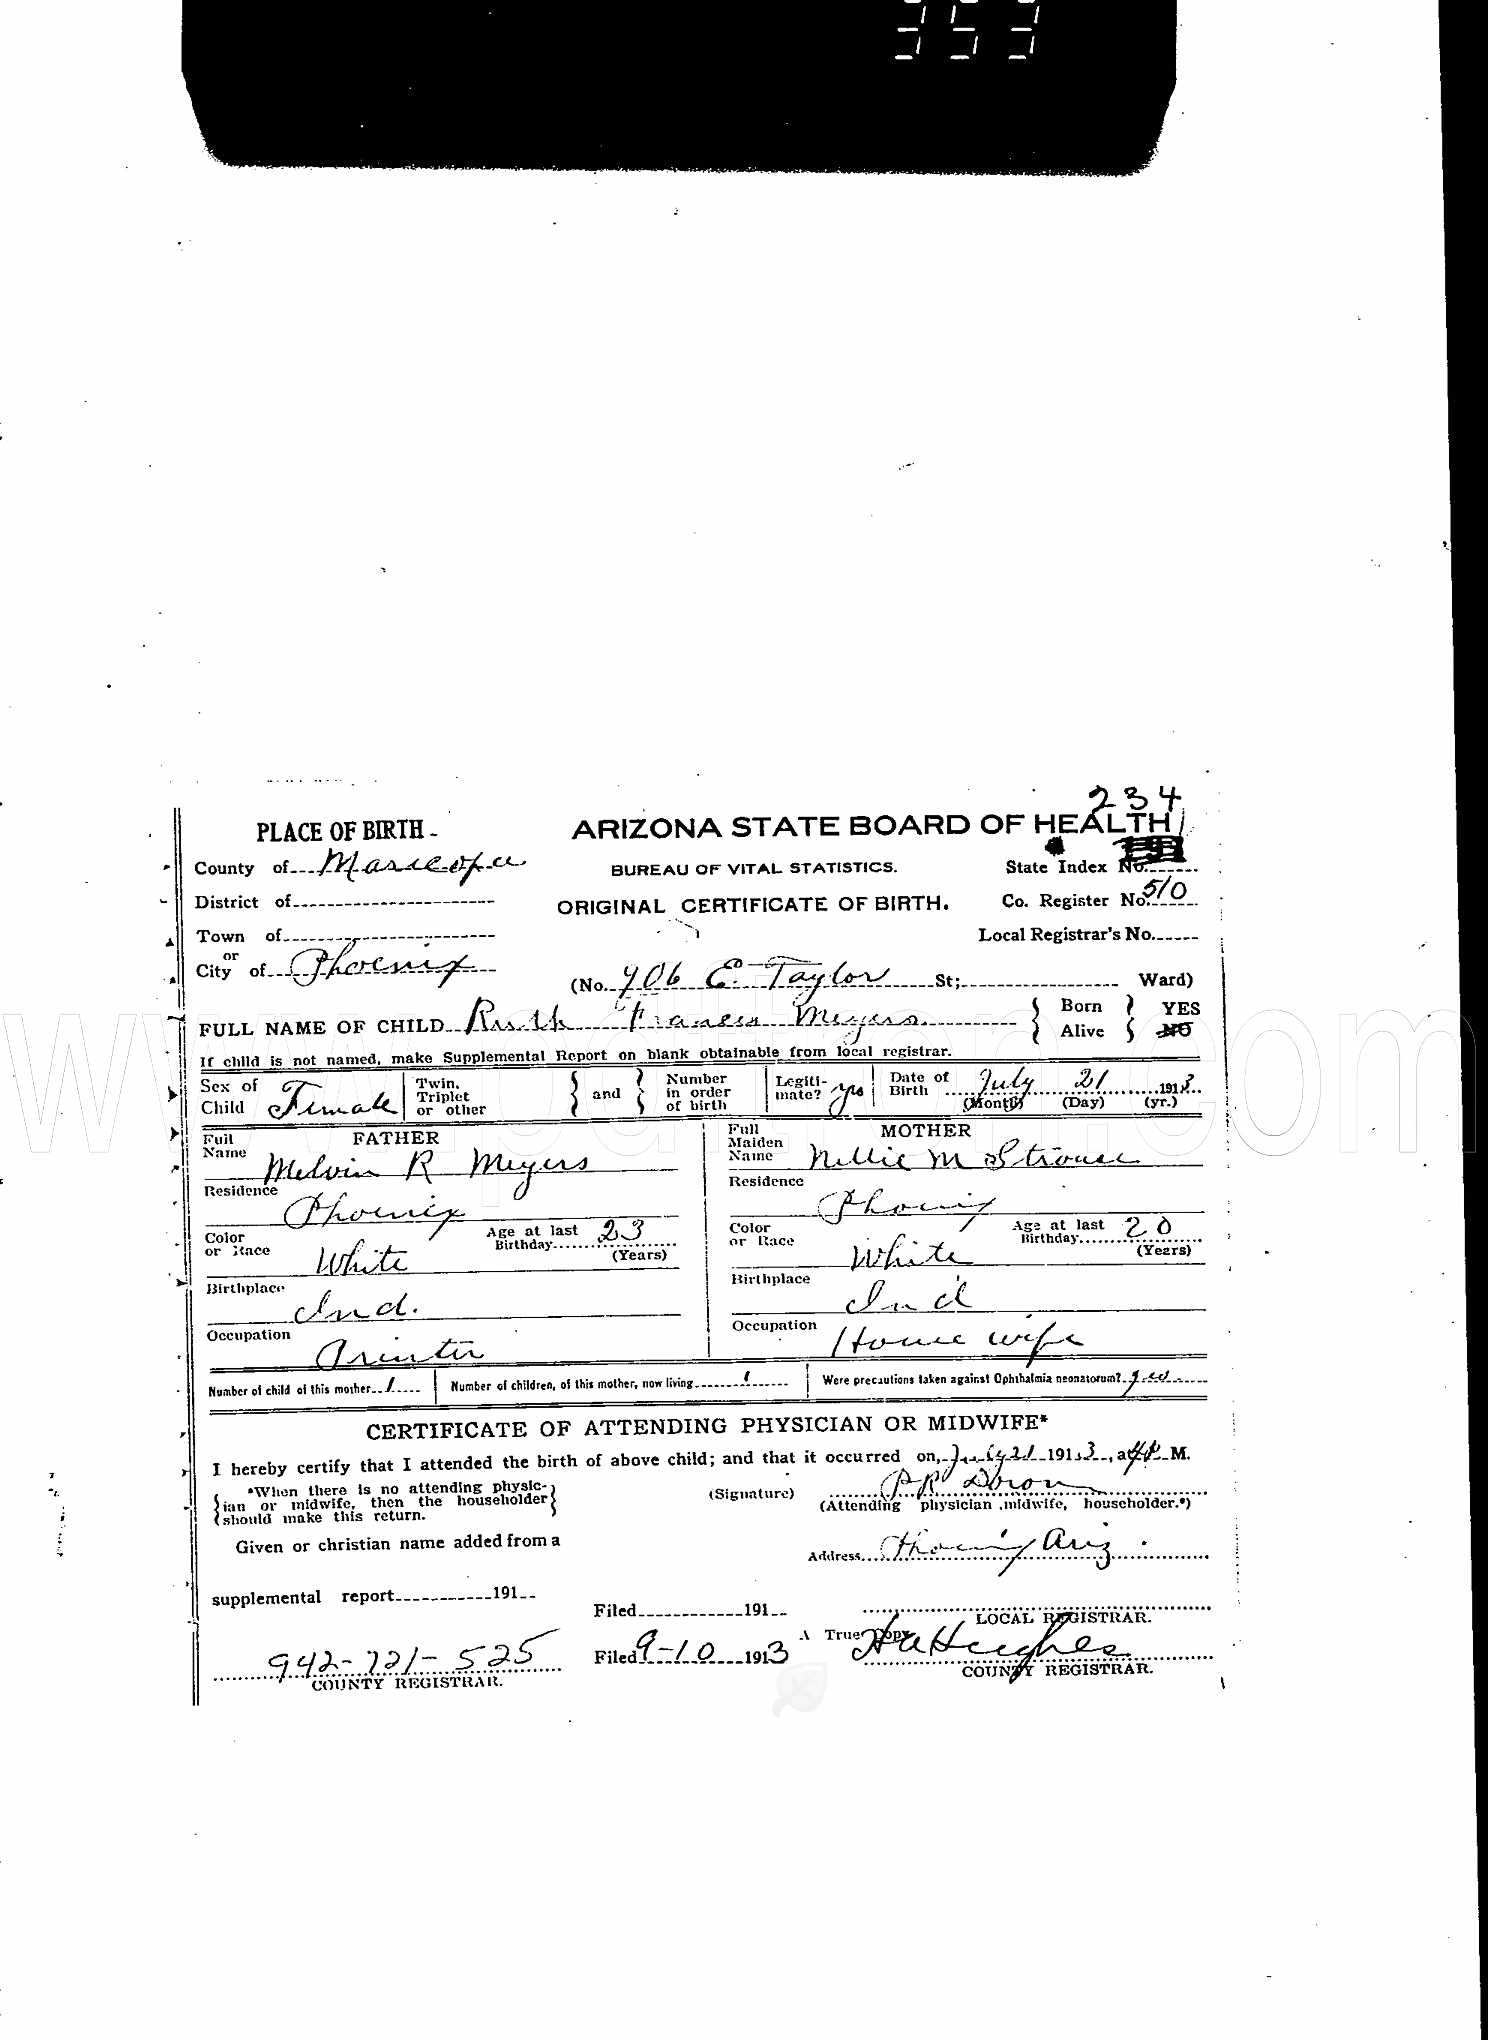 Birth certificate of Ruth Frances Meyers